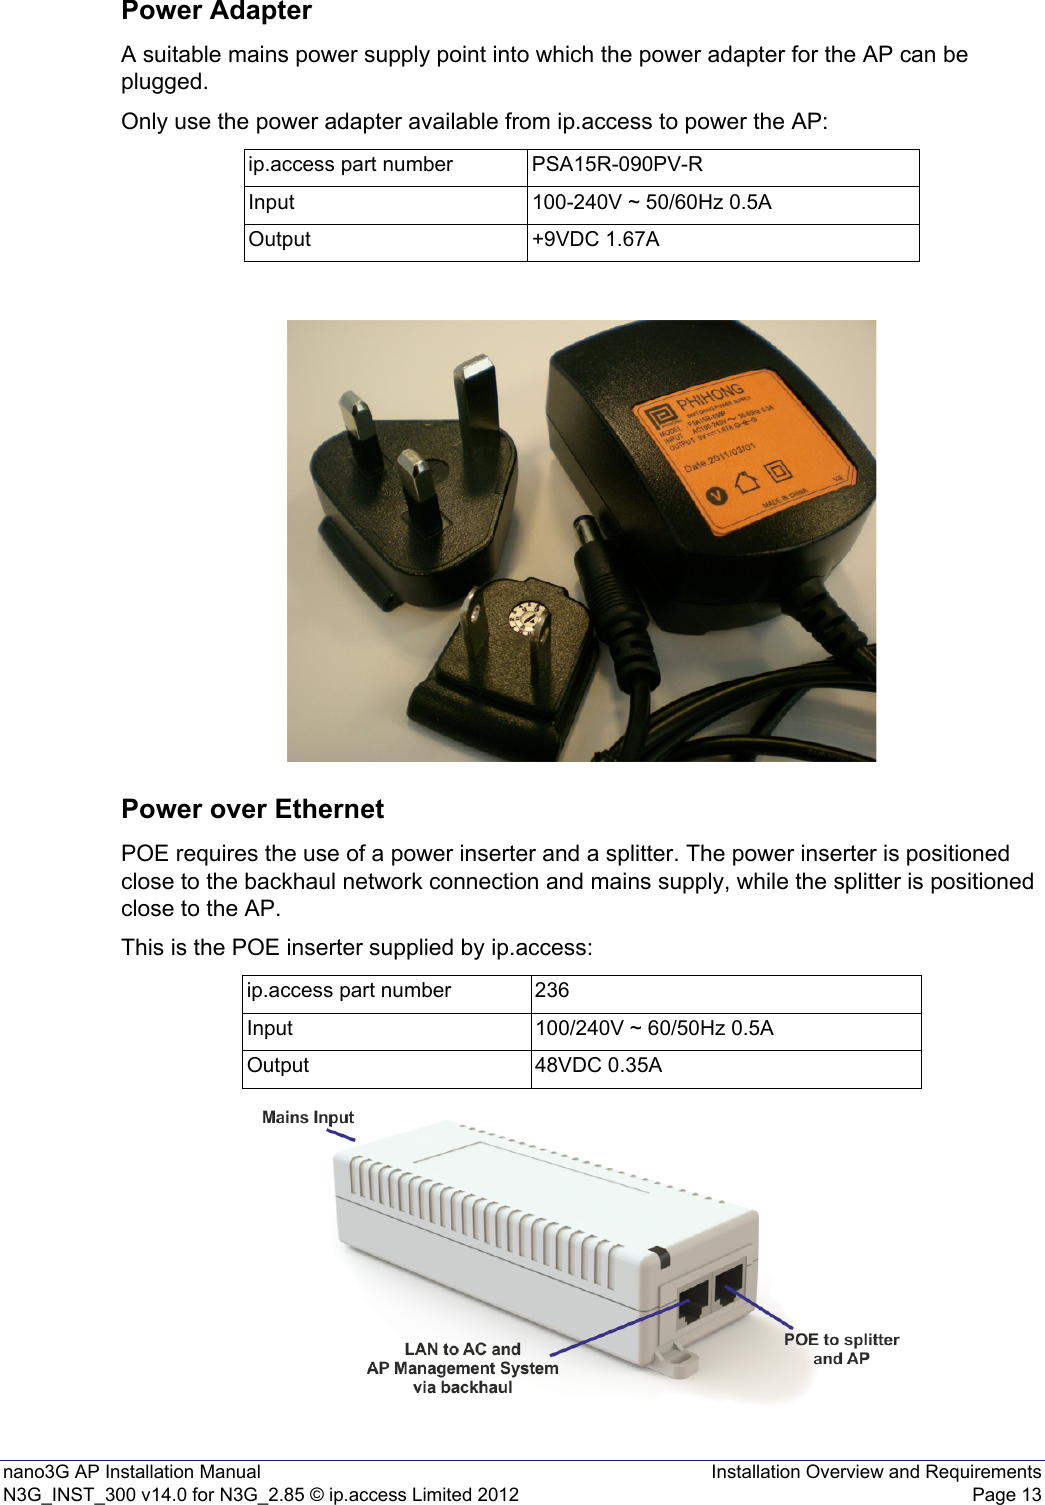 nano3G AP Installation Manual Installation Overview and RequirementsN3G_INST_300 v14.0 for N3G_2.85 © ip.access Limited 2012 Page 13Power AdapterA suitable mains power supply point into which the power adapter for the AP can be plugged.Only use the power adapter available from ip.access to power the AP:Power over EthernetPOE requires the use of a power inserter and a splitter. The power inserter is positioned close to the backhaul network connection and mains supply, while the splitter is positioned close to the AP.This is the POE inserter supplied by ip.access:ip.access part number PSA15R-090PV-RInput 100-240V ~ 50/60Hz 0.5AOutput +9VDC 1.67Aip.access part number 236Input 100/240V ~ 60/50Hz 0.5AOutput 48VDC 0.35A